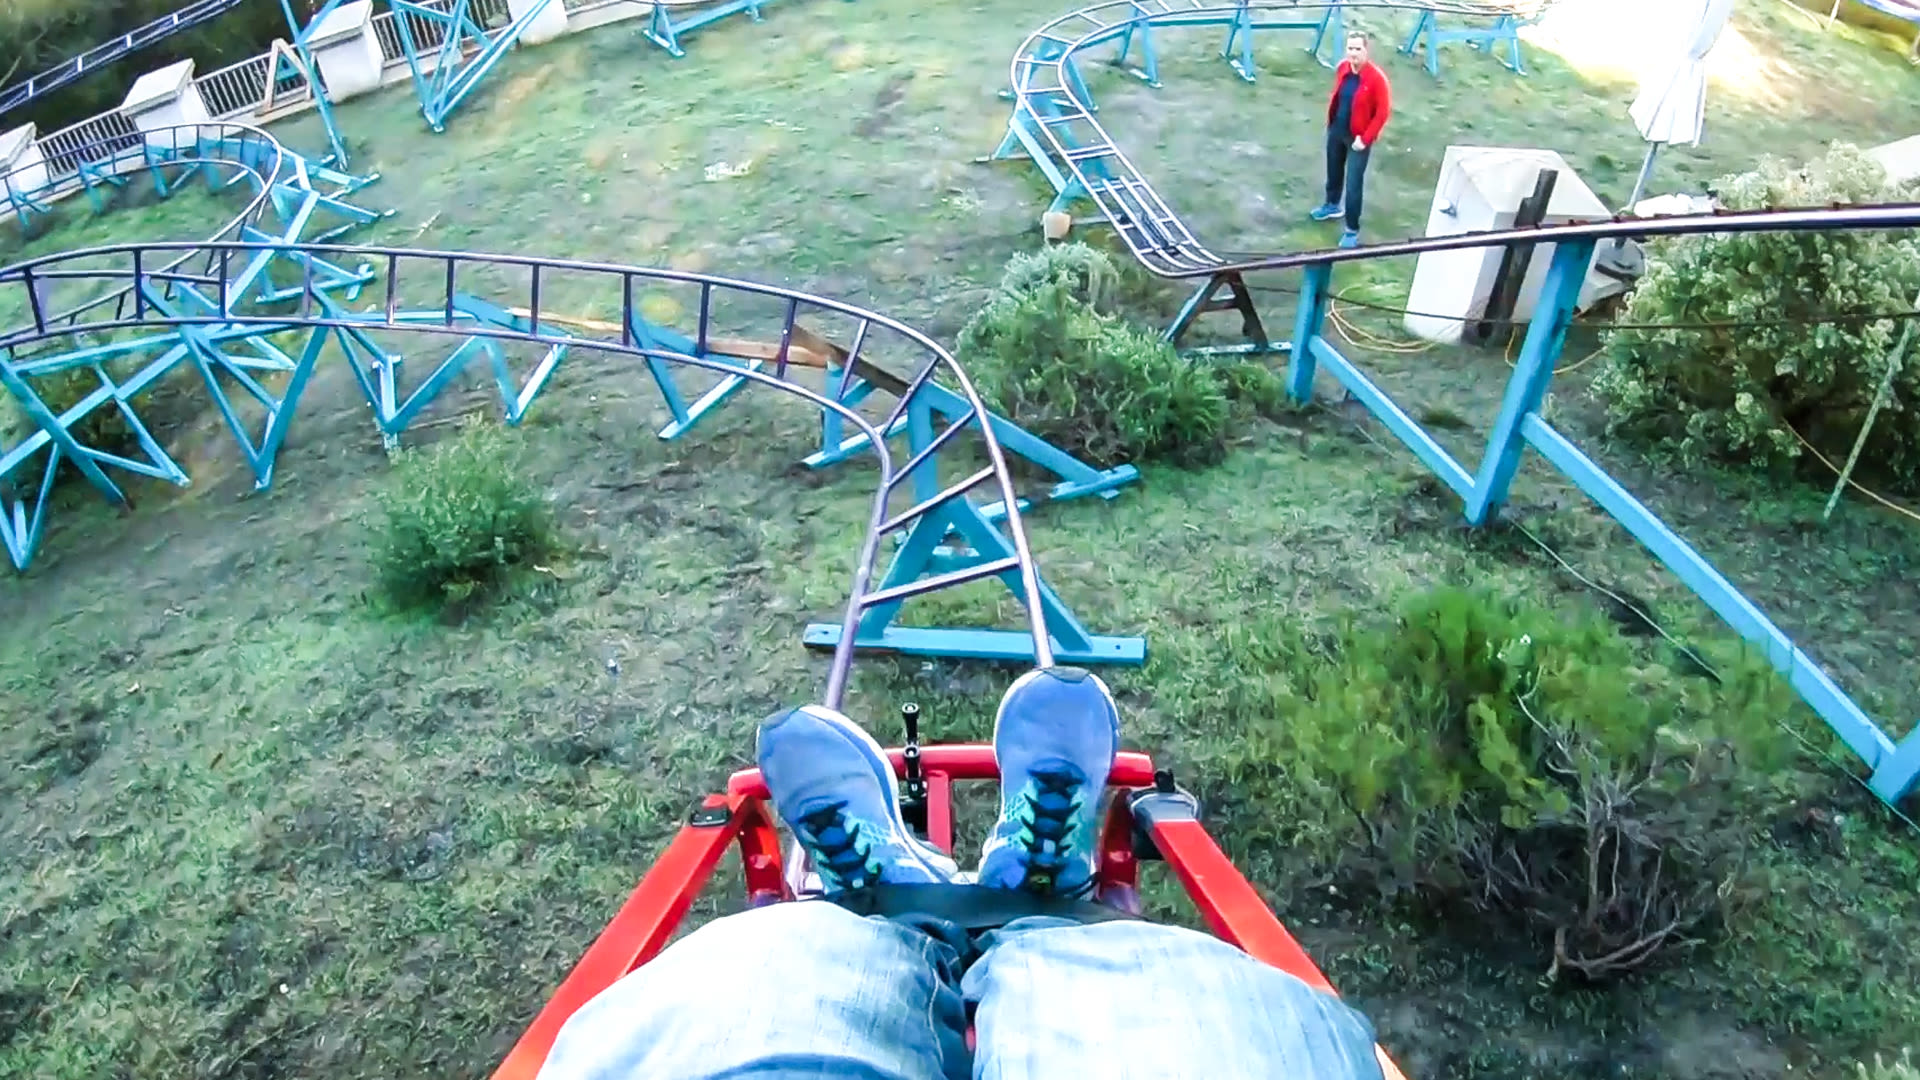 Man Builds A Roller Coaster In His Backyard